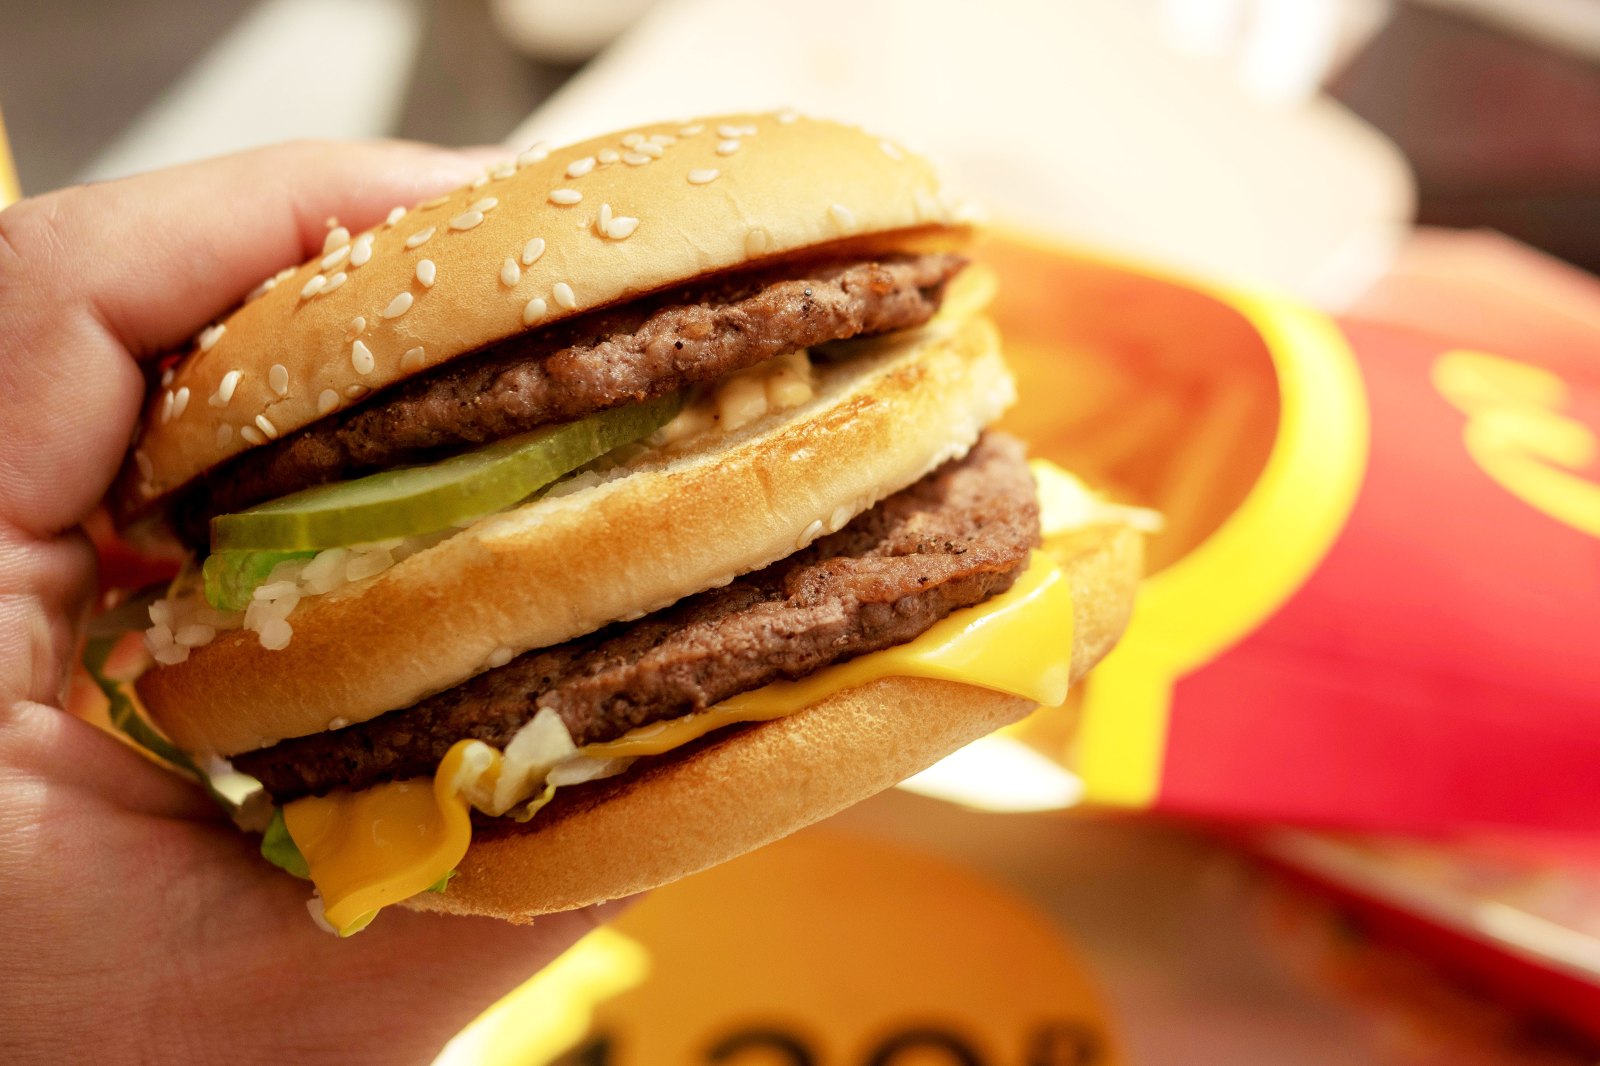 DoorDash Is Selling Big Macs for a Penny, Giving Away 1 Million Us